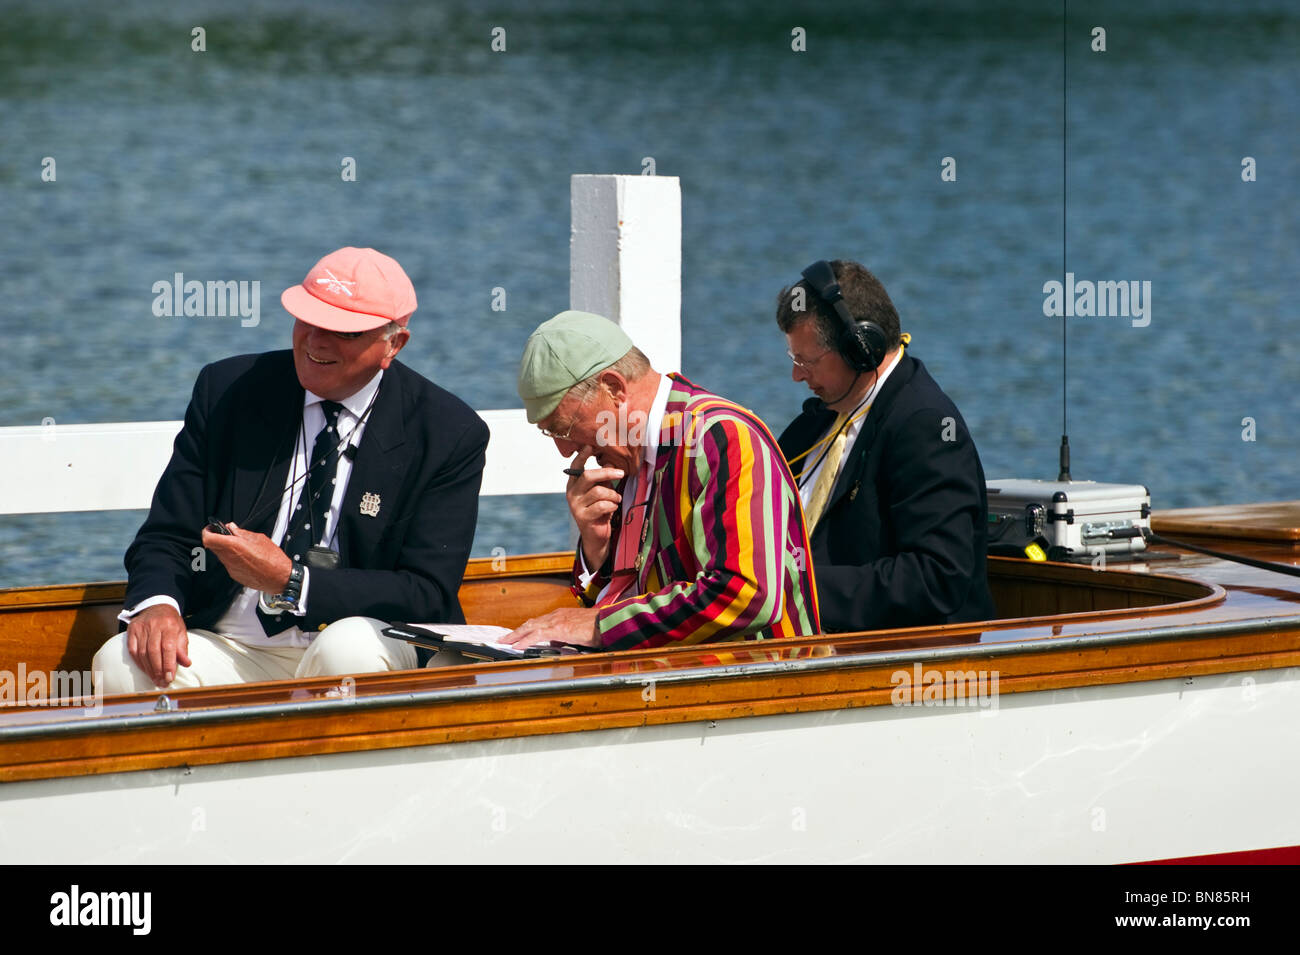 Umpires and officials consult just before the start of a race at Henley Royal Regatta a yearly event every UK Summer in July. Stock Photo